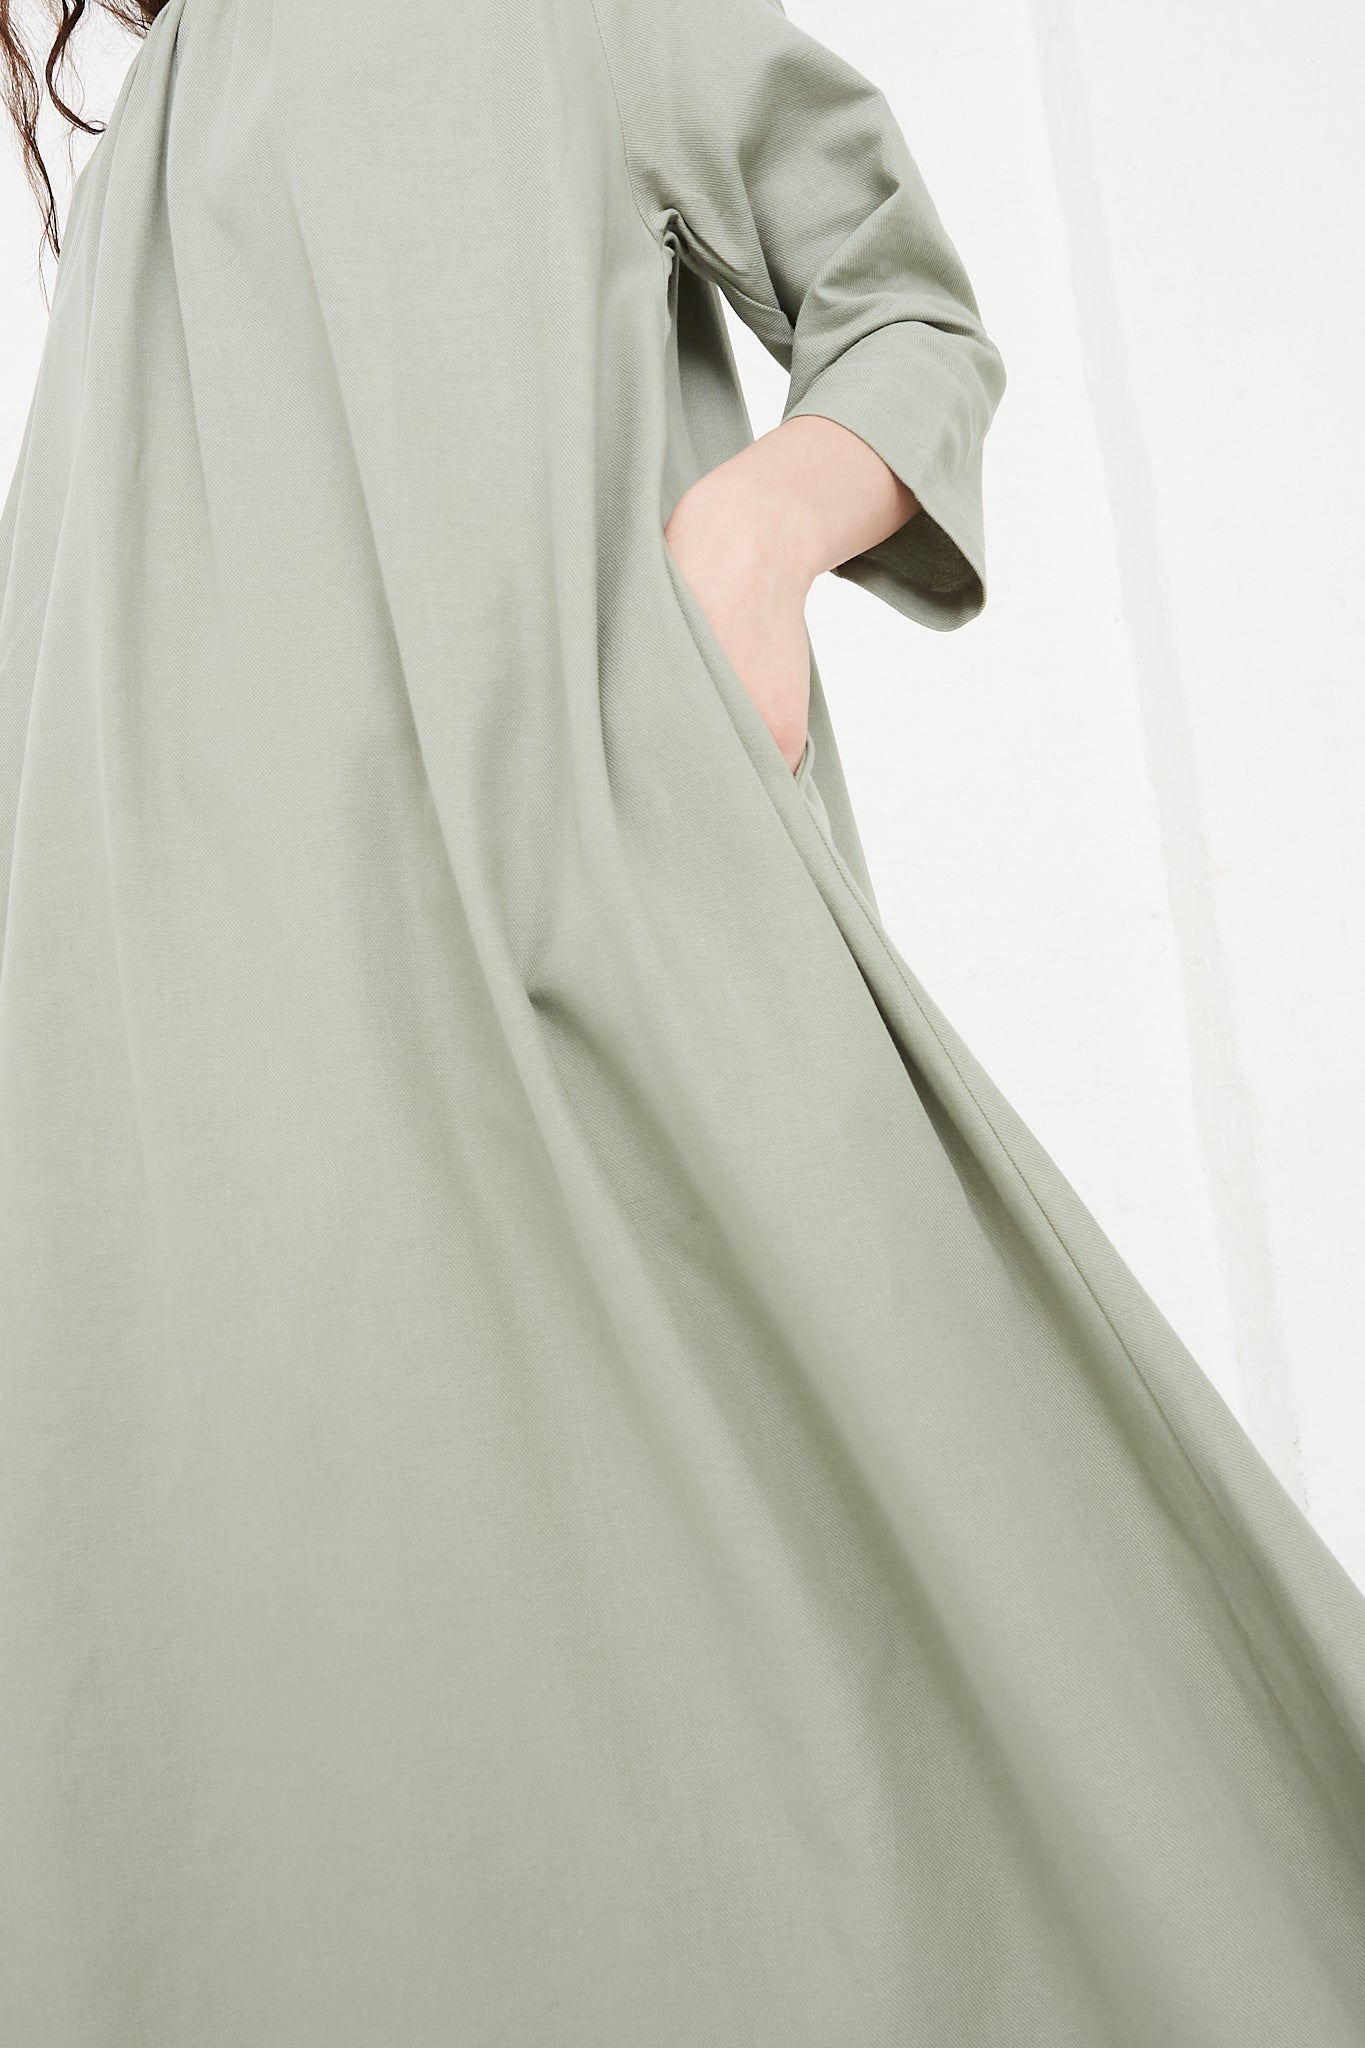 The model is wearing a Cotton Twill Shirred Neck Dress in Agave by Black Crane. Side view. Model's hand is in pocket.